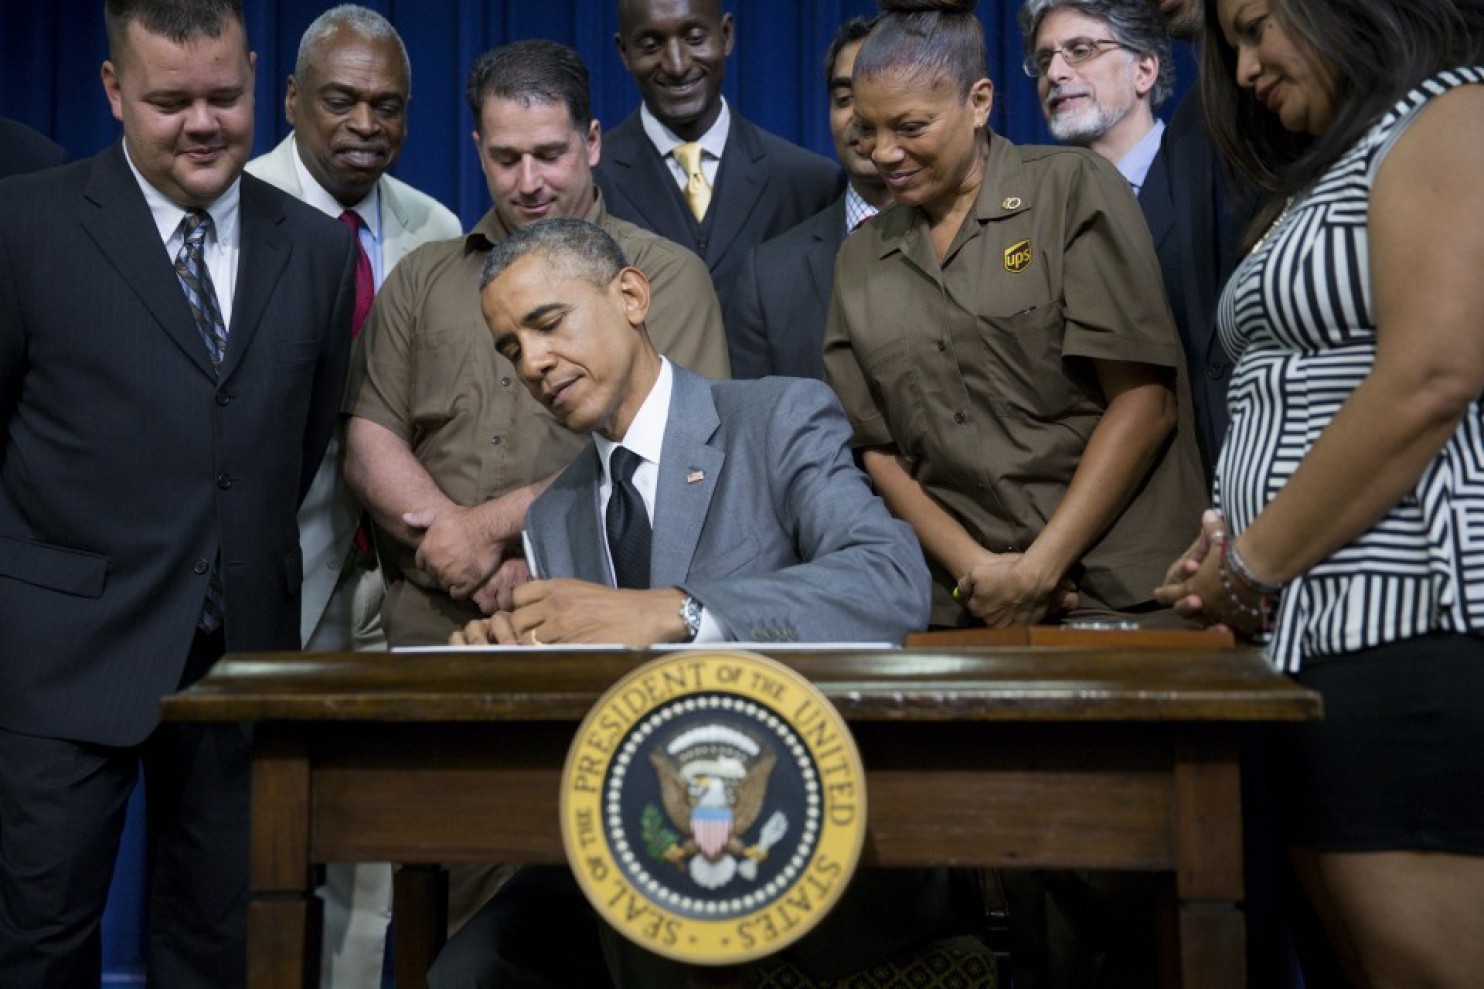 Republicans Rushing to Stop Enforcing Obama’s ‘Fair Pay and Safe Workplace’